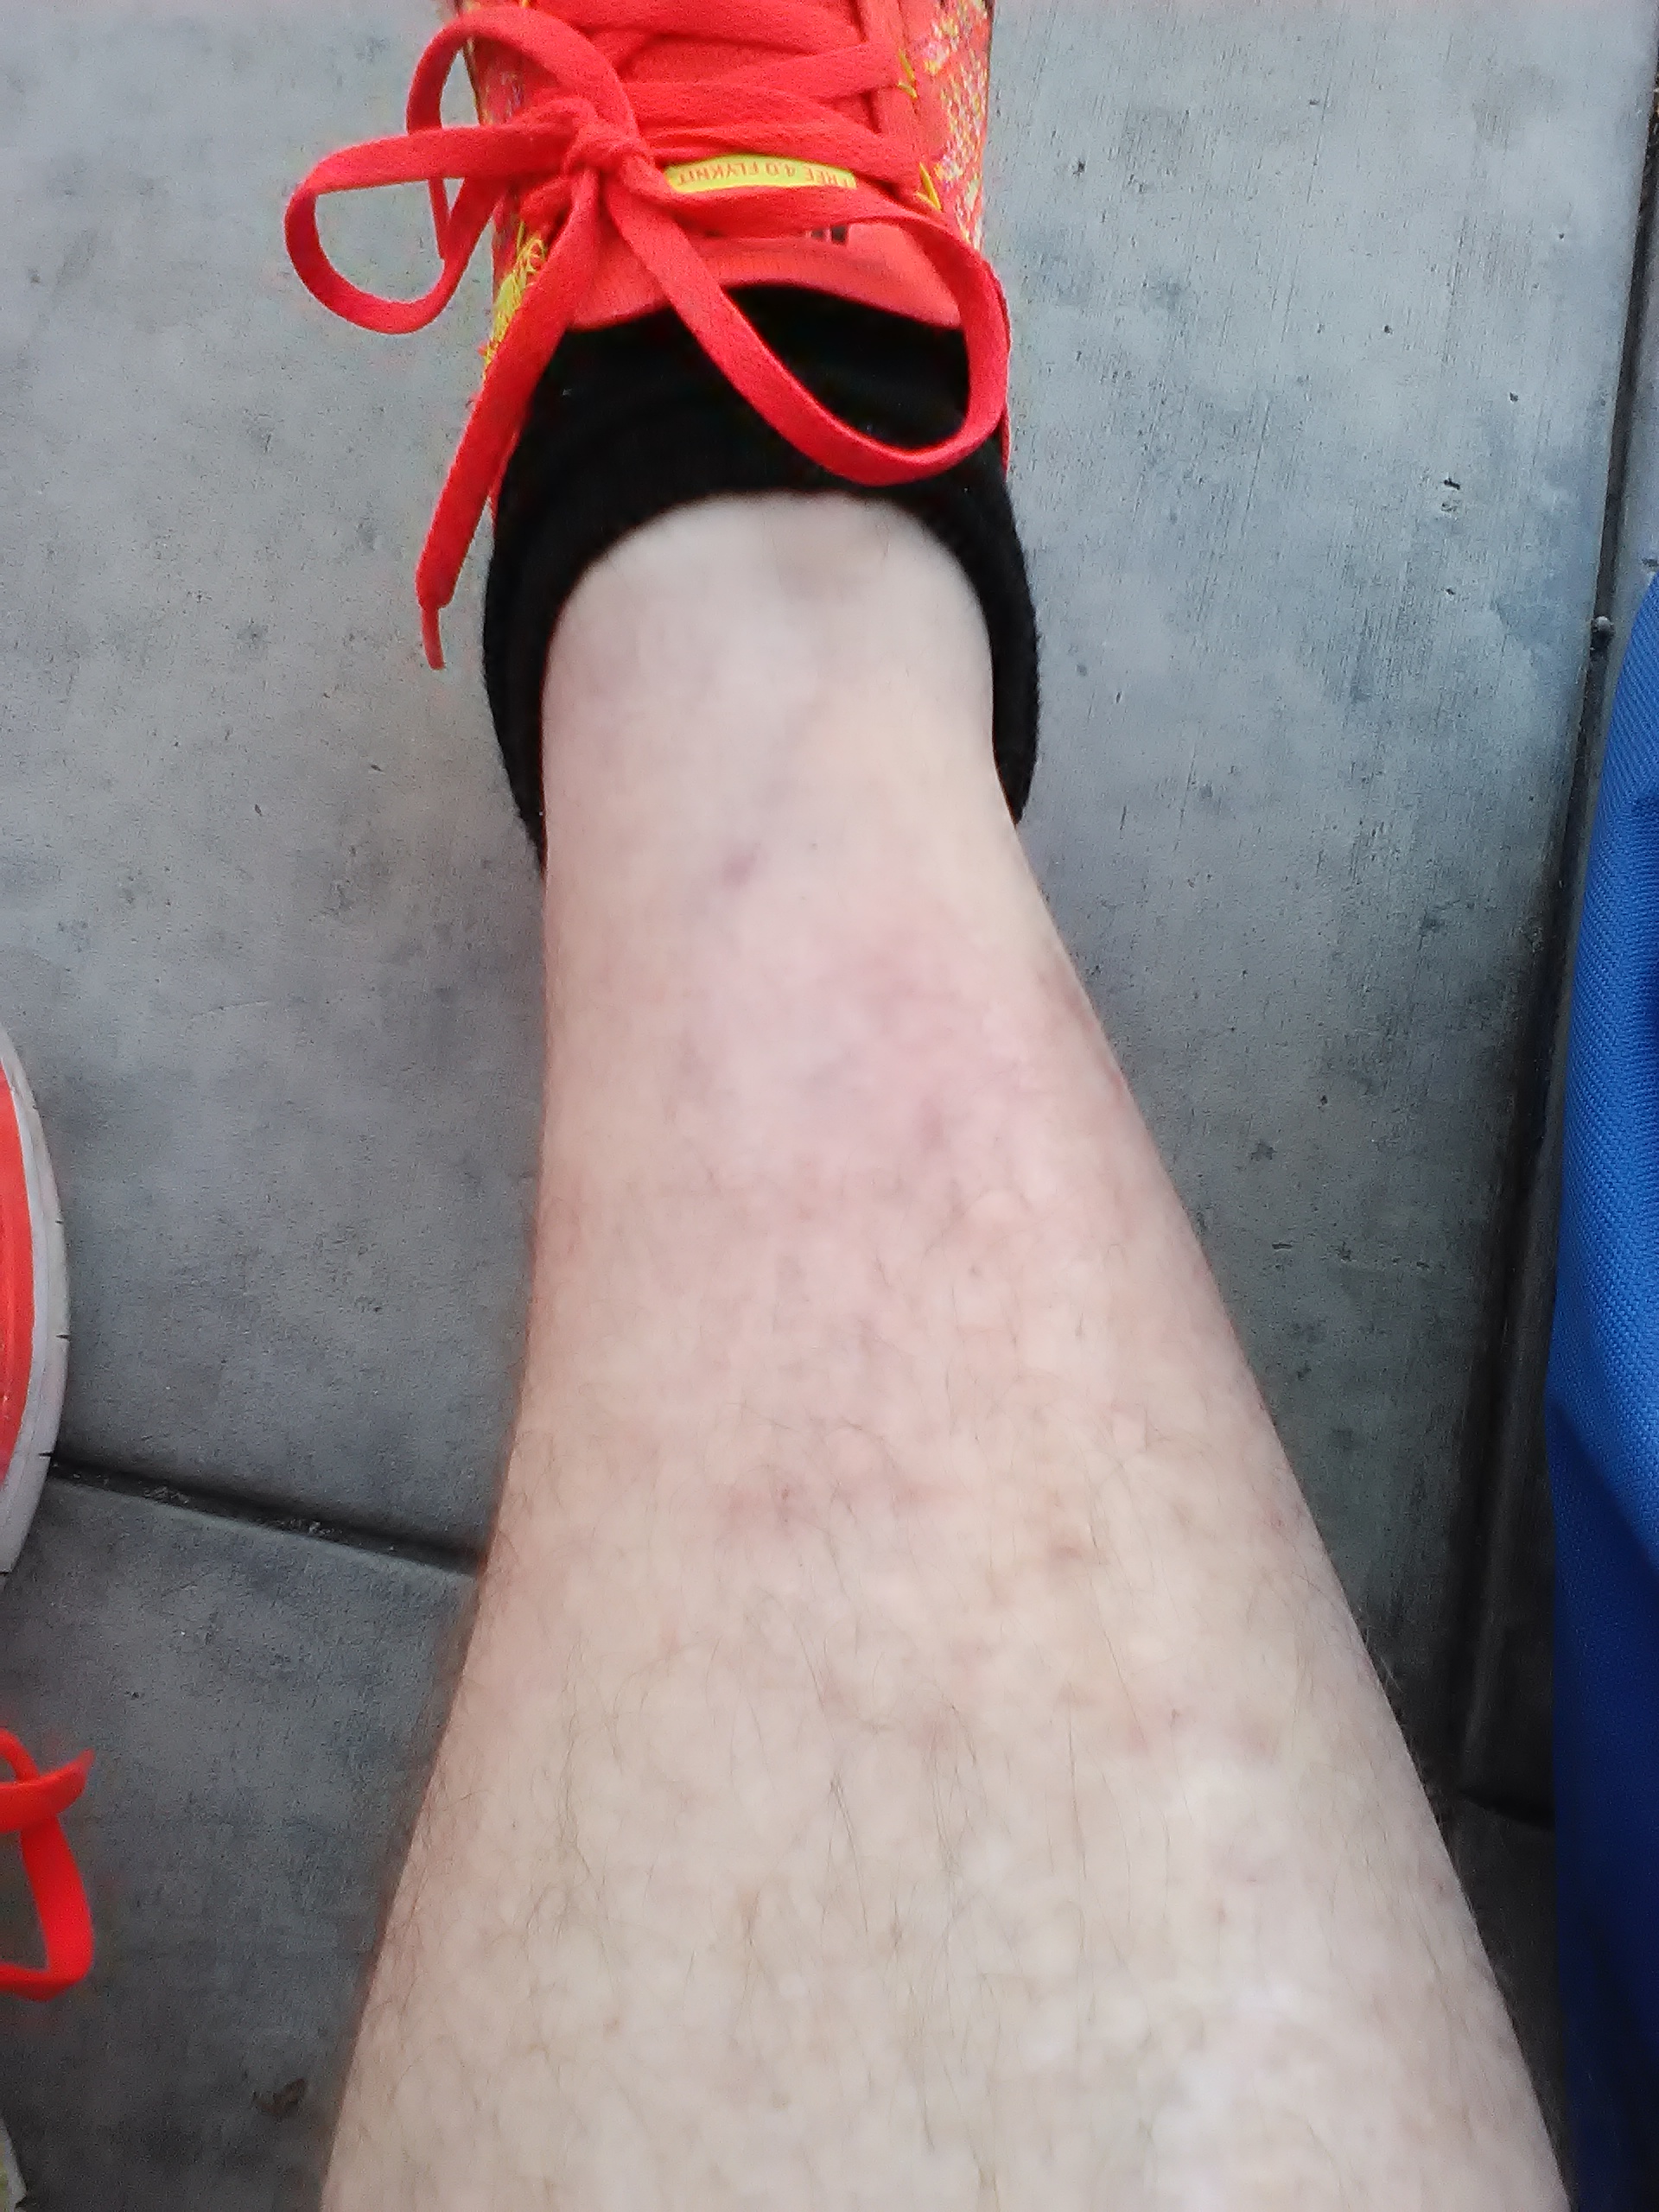 My legs healthy. Within 5 days in Jail blood flow cut off and sores appear and severe swelling.